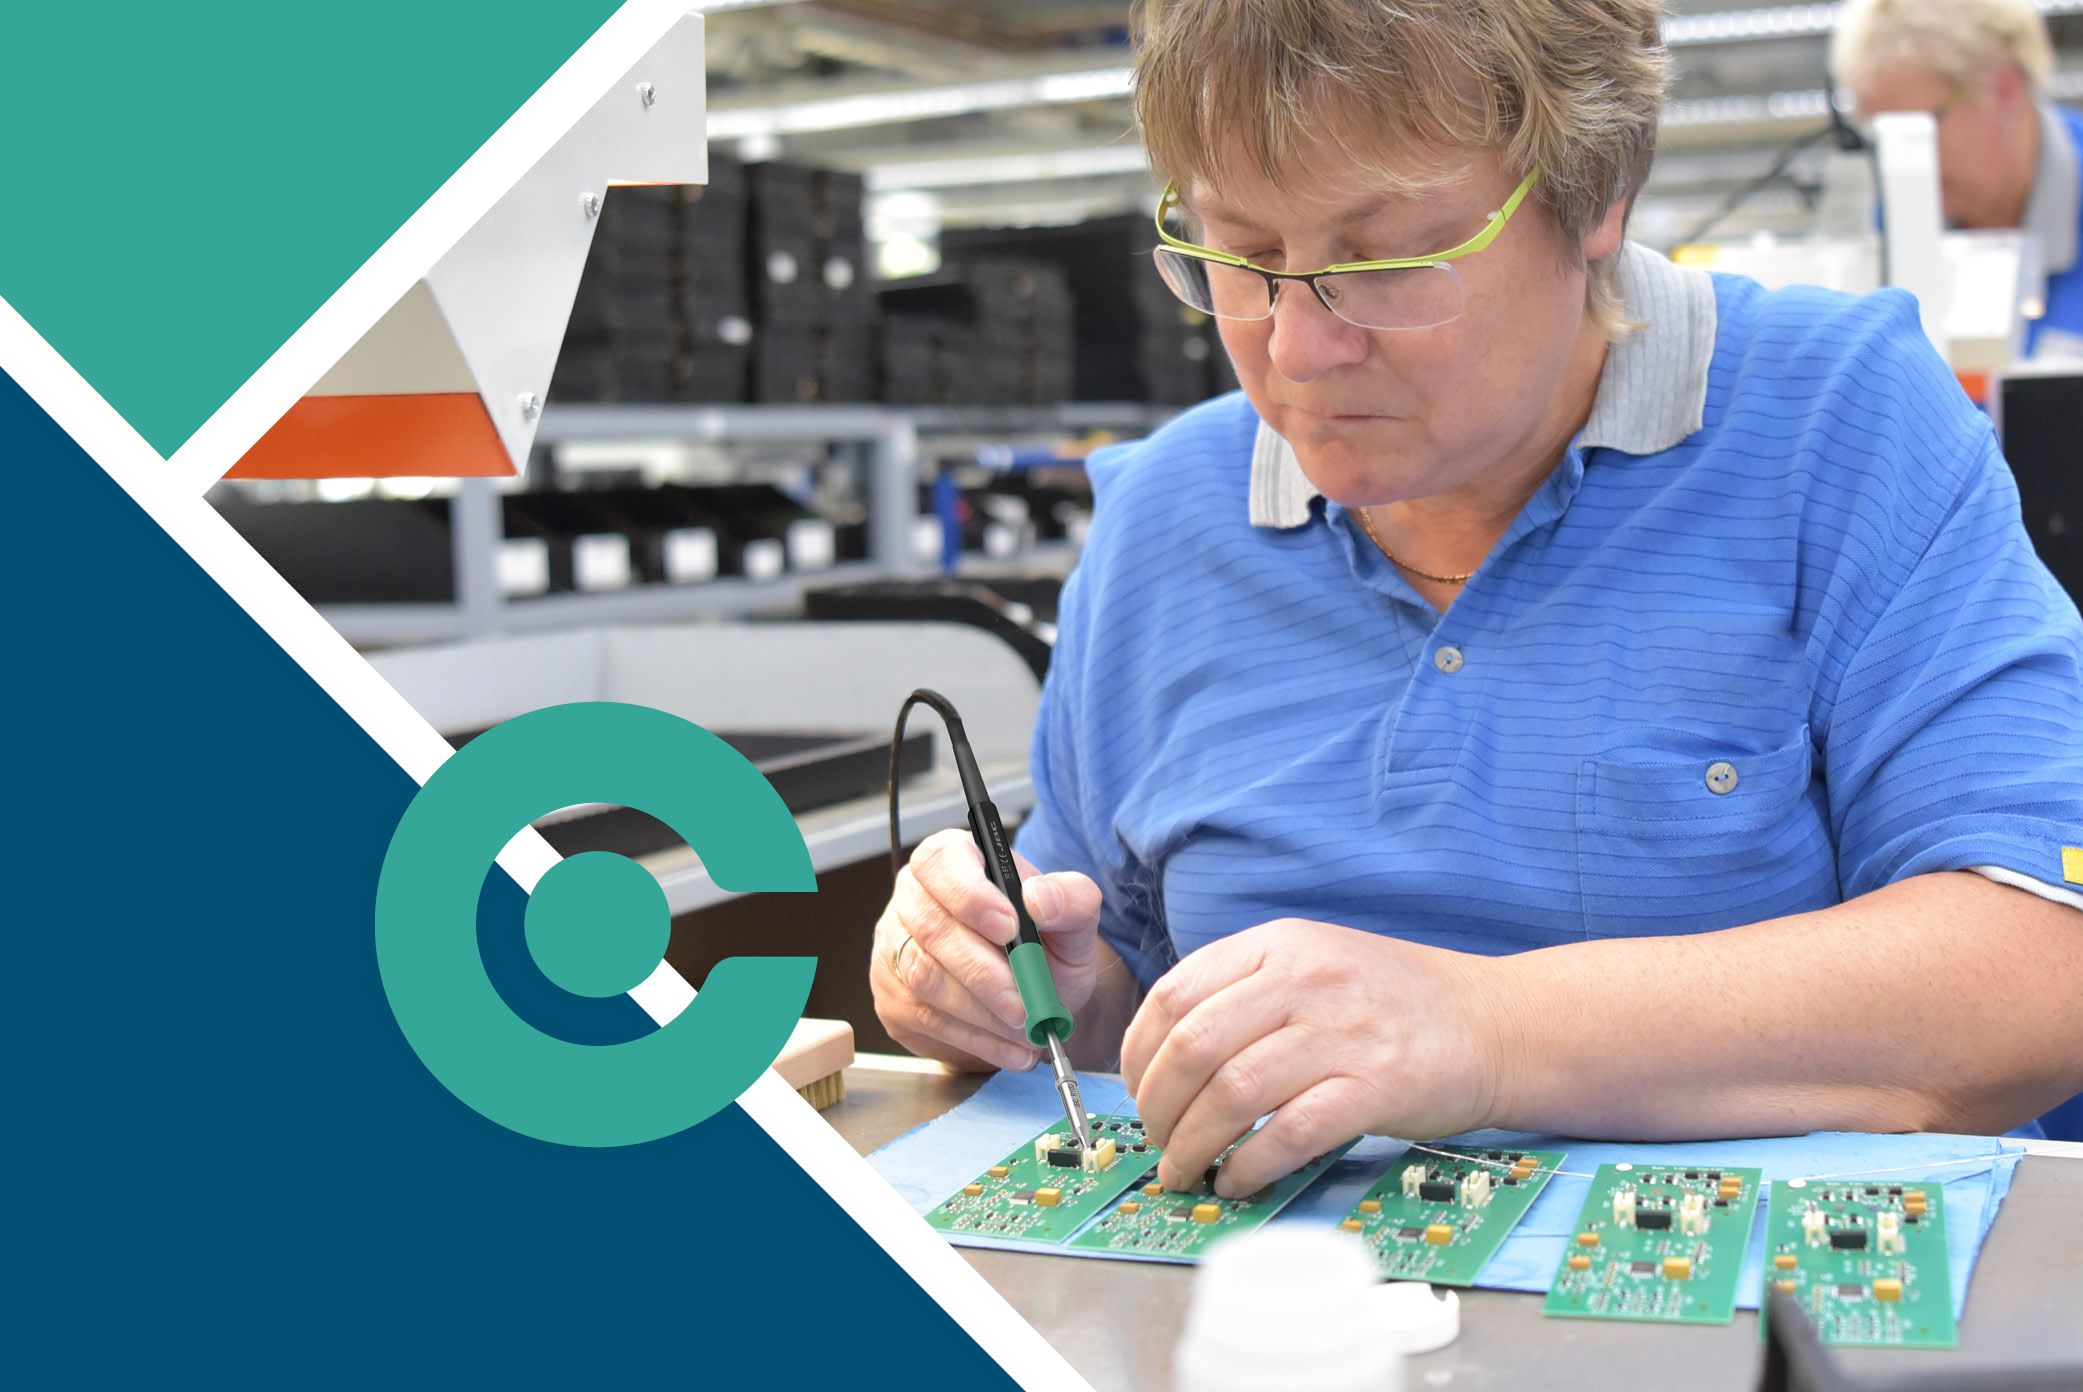 JBC soldering systems can lift productivity & soldering quality